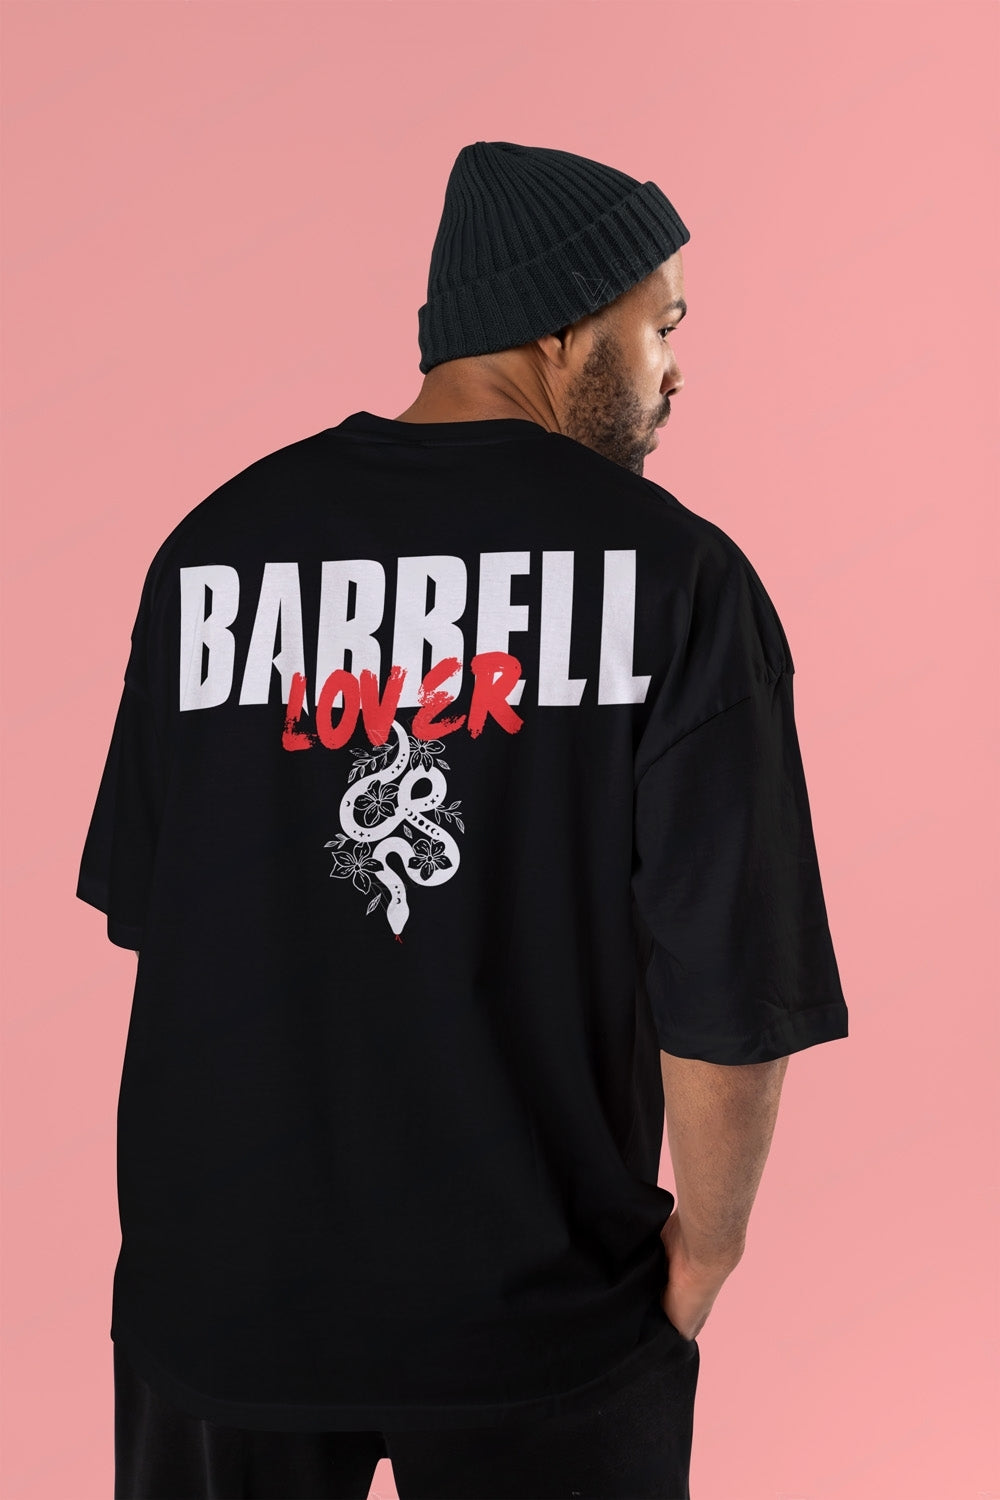 Barbell Lover - Gym Oversized T Shirt Strong Soul Shirts & Tops